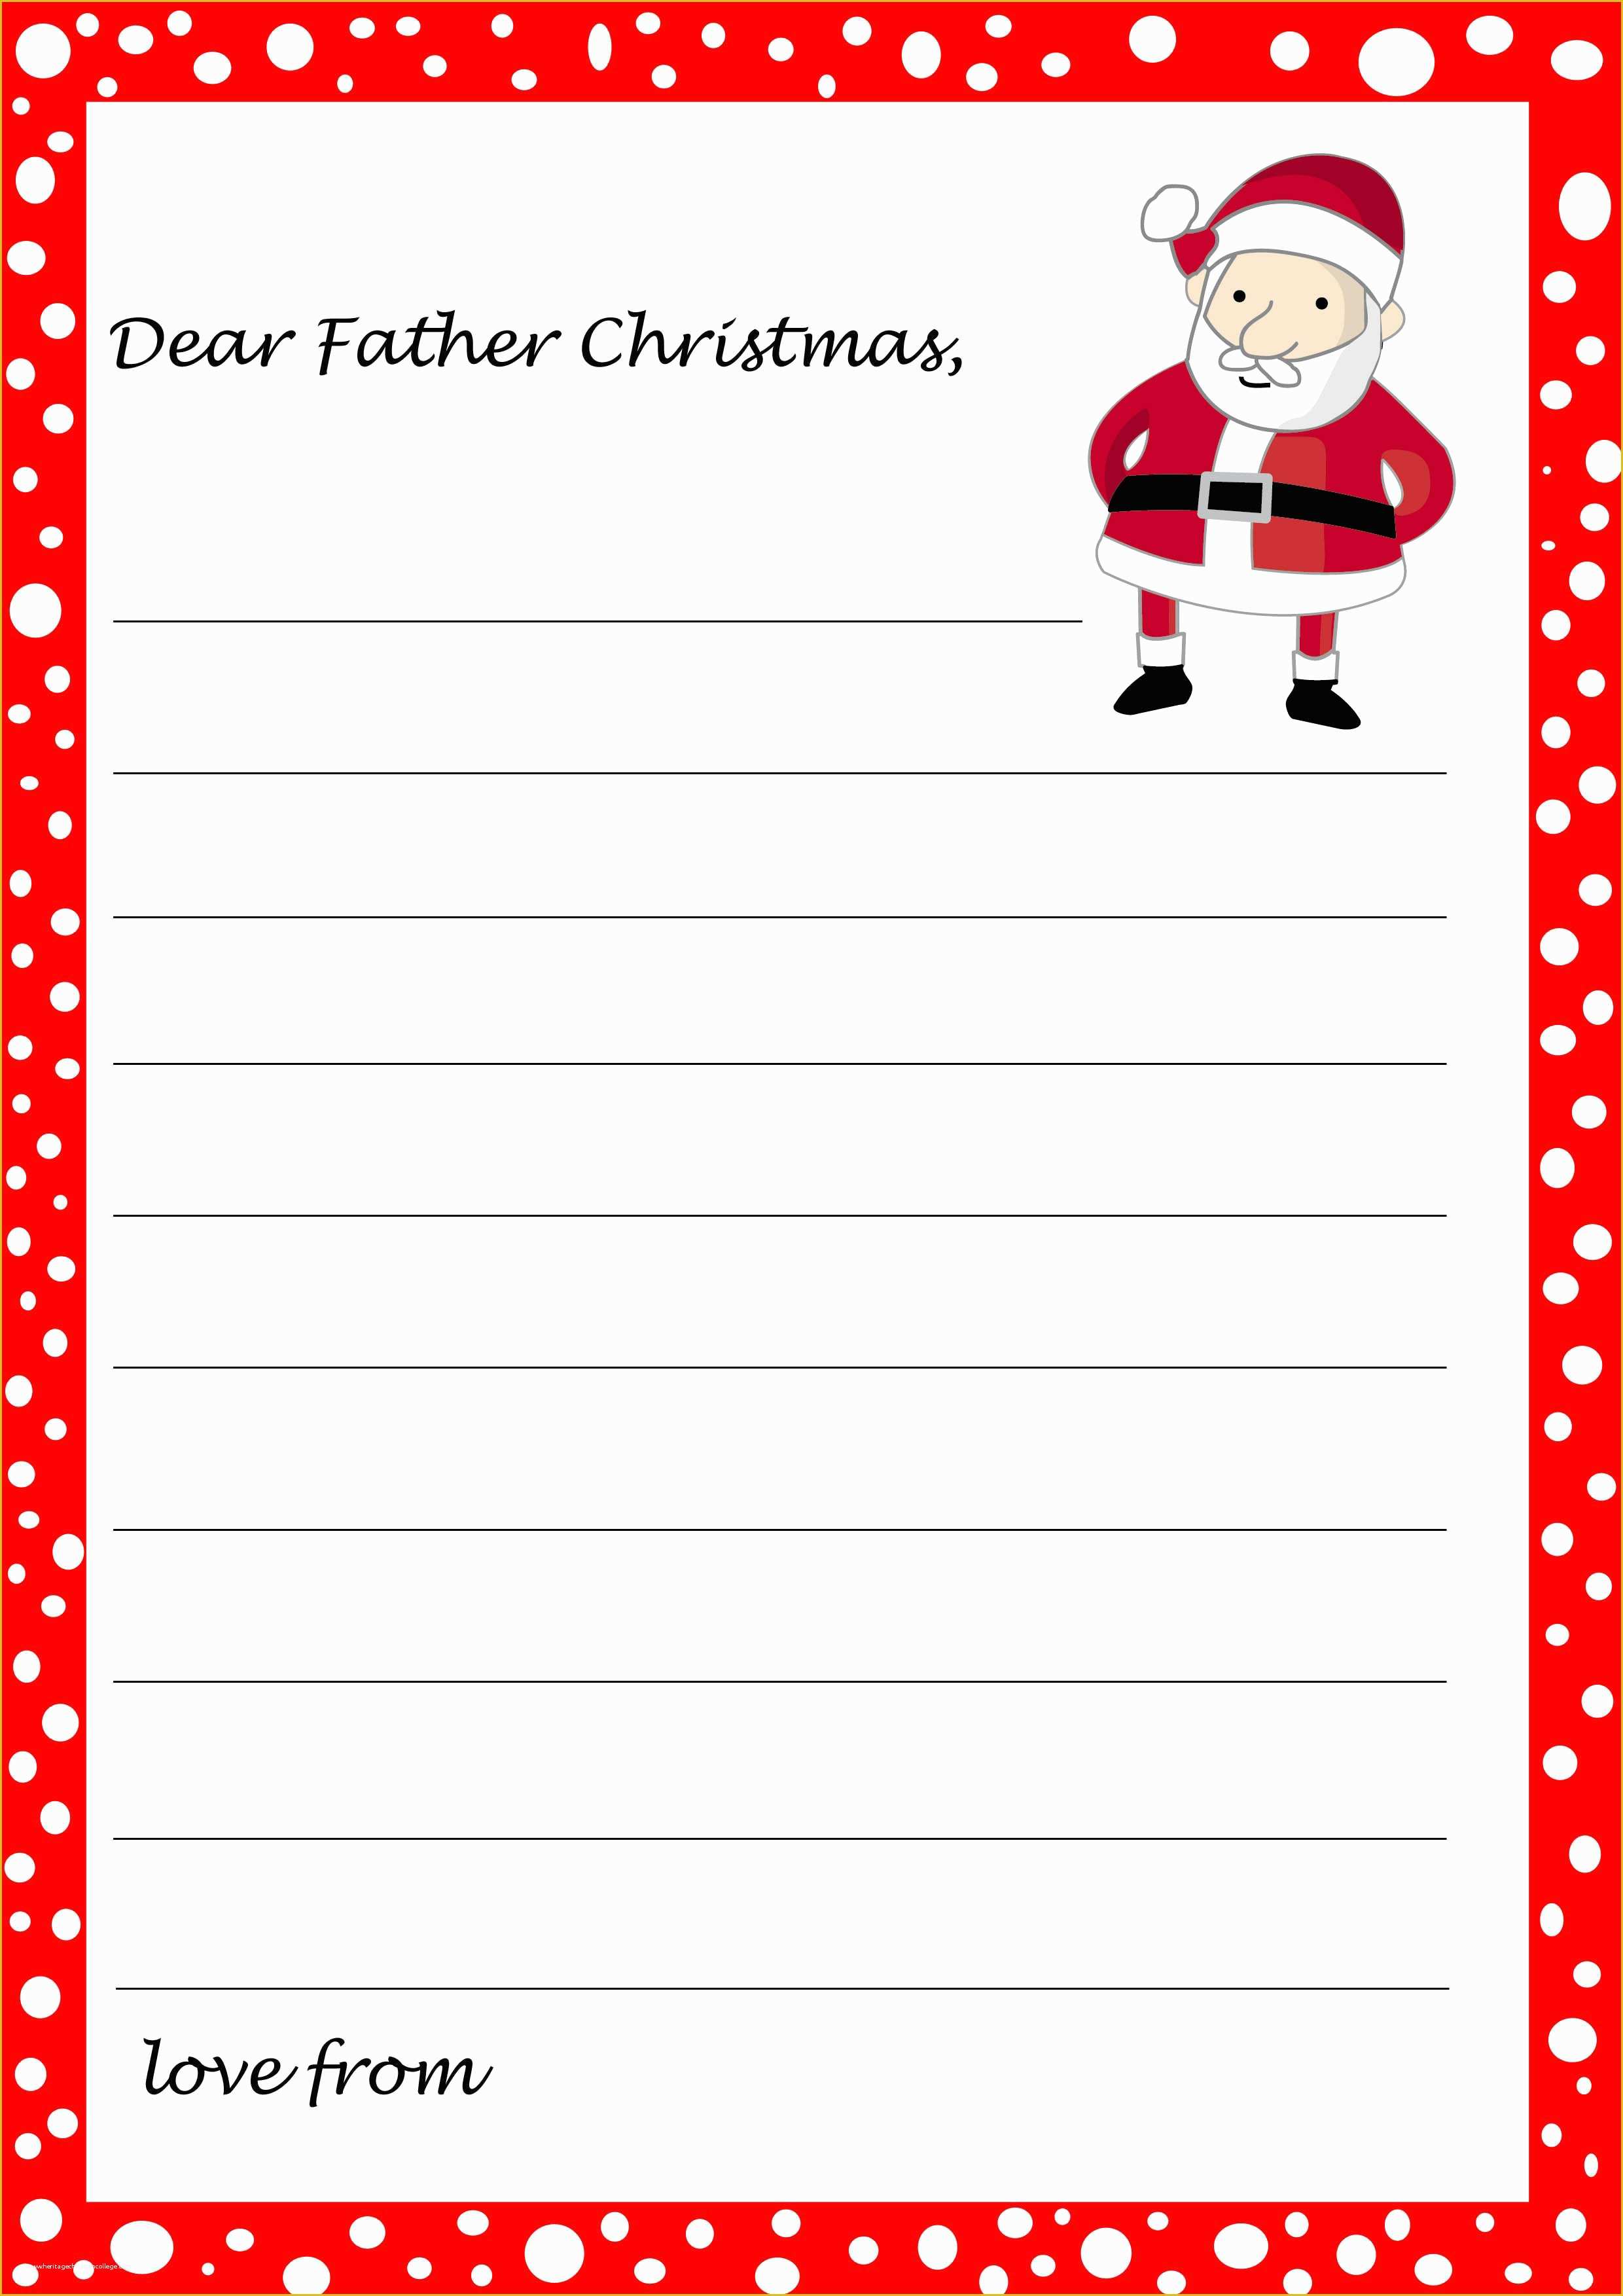 Free Christmas Letter Templates Of 6 Christmas Templates For Word 